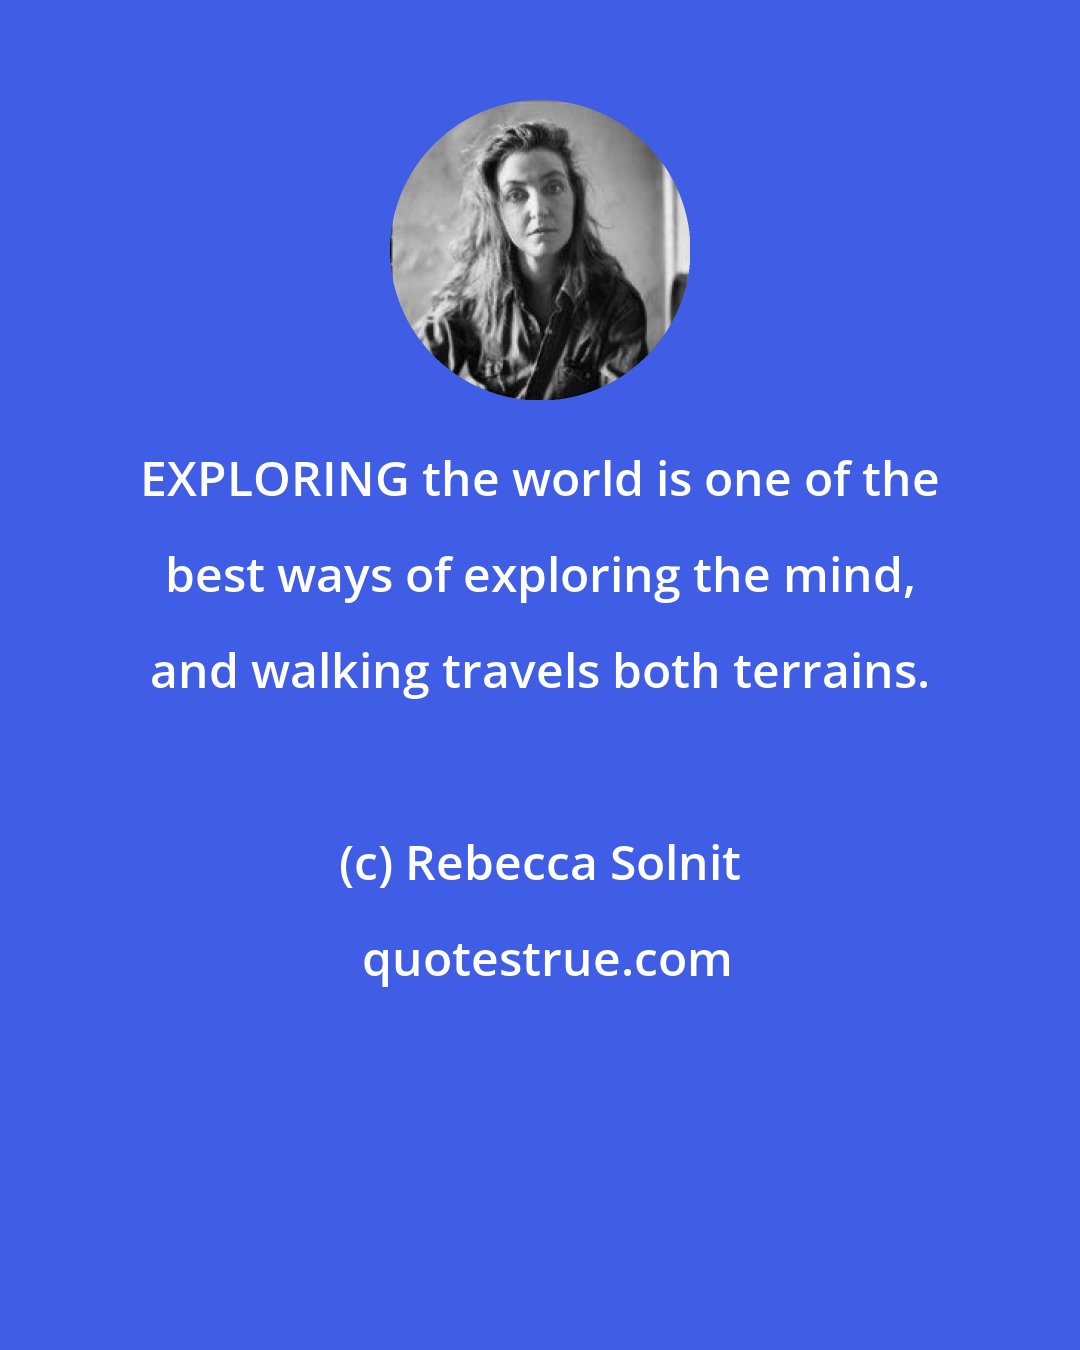 Rebecca Solnit: EXPLORING the world is one of the best ways of exploring the mind, and walking travels both terrains.